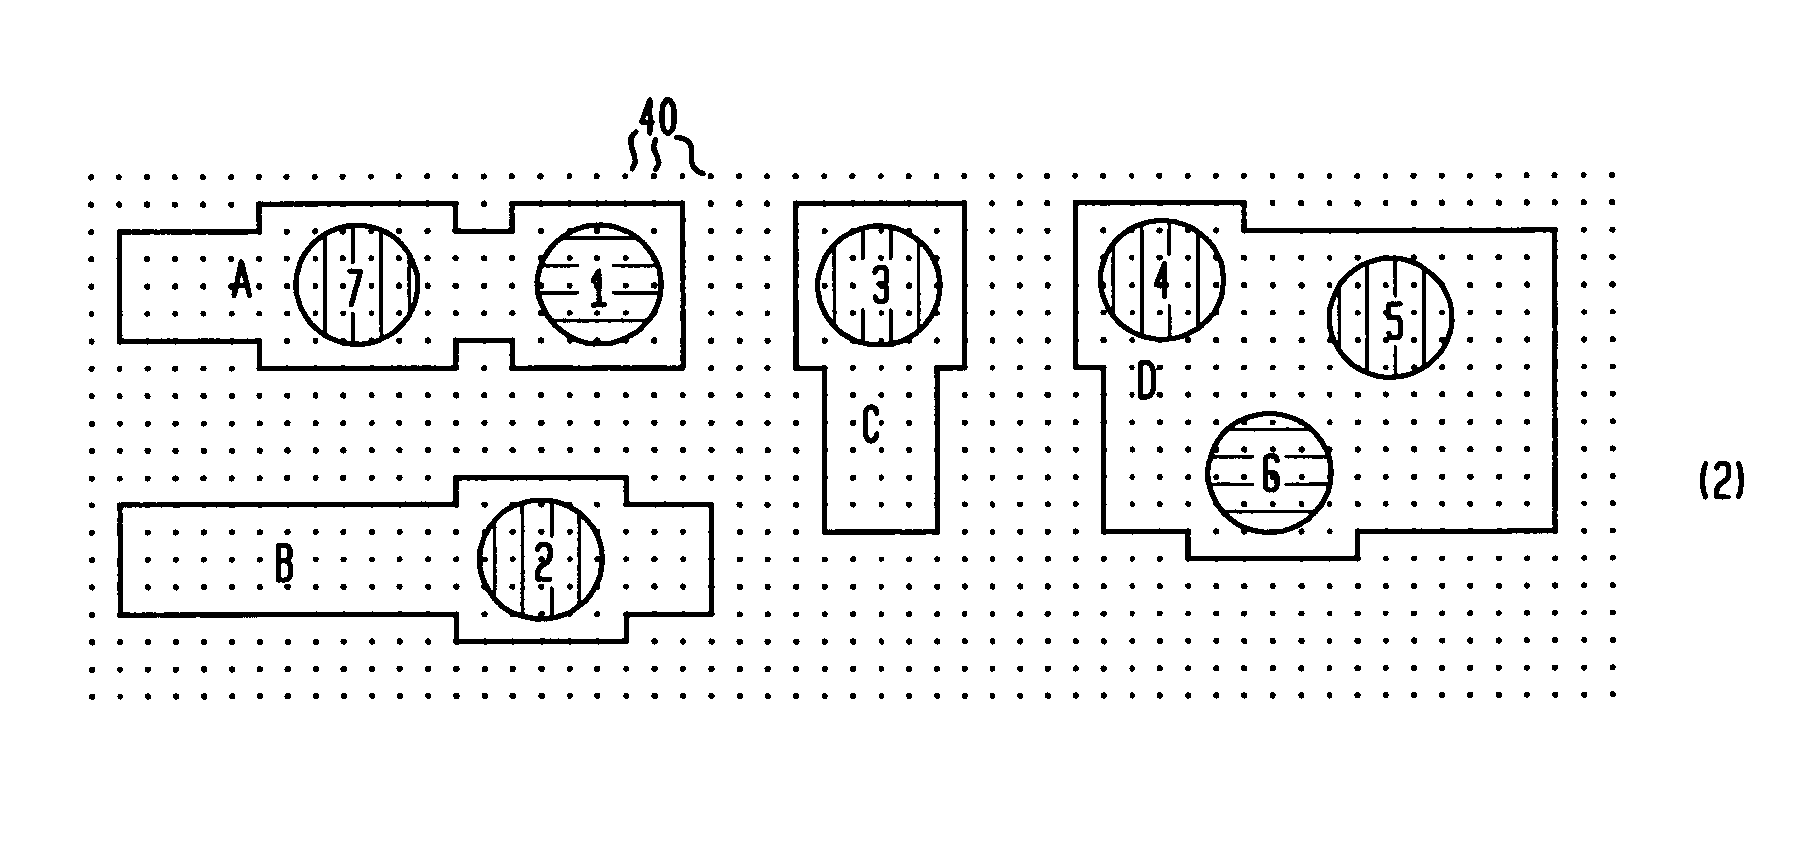 Circuit layout methodology using a shape processing application